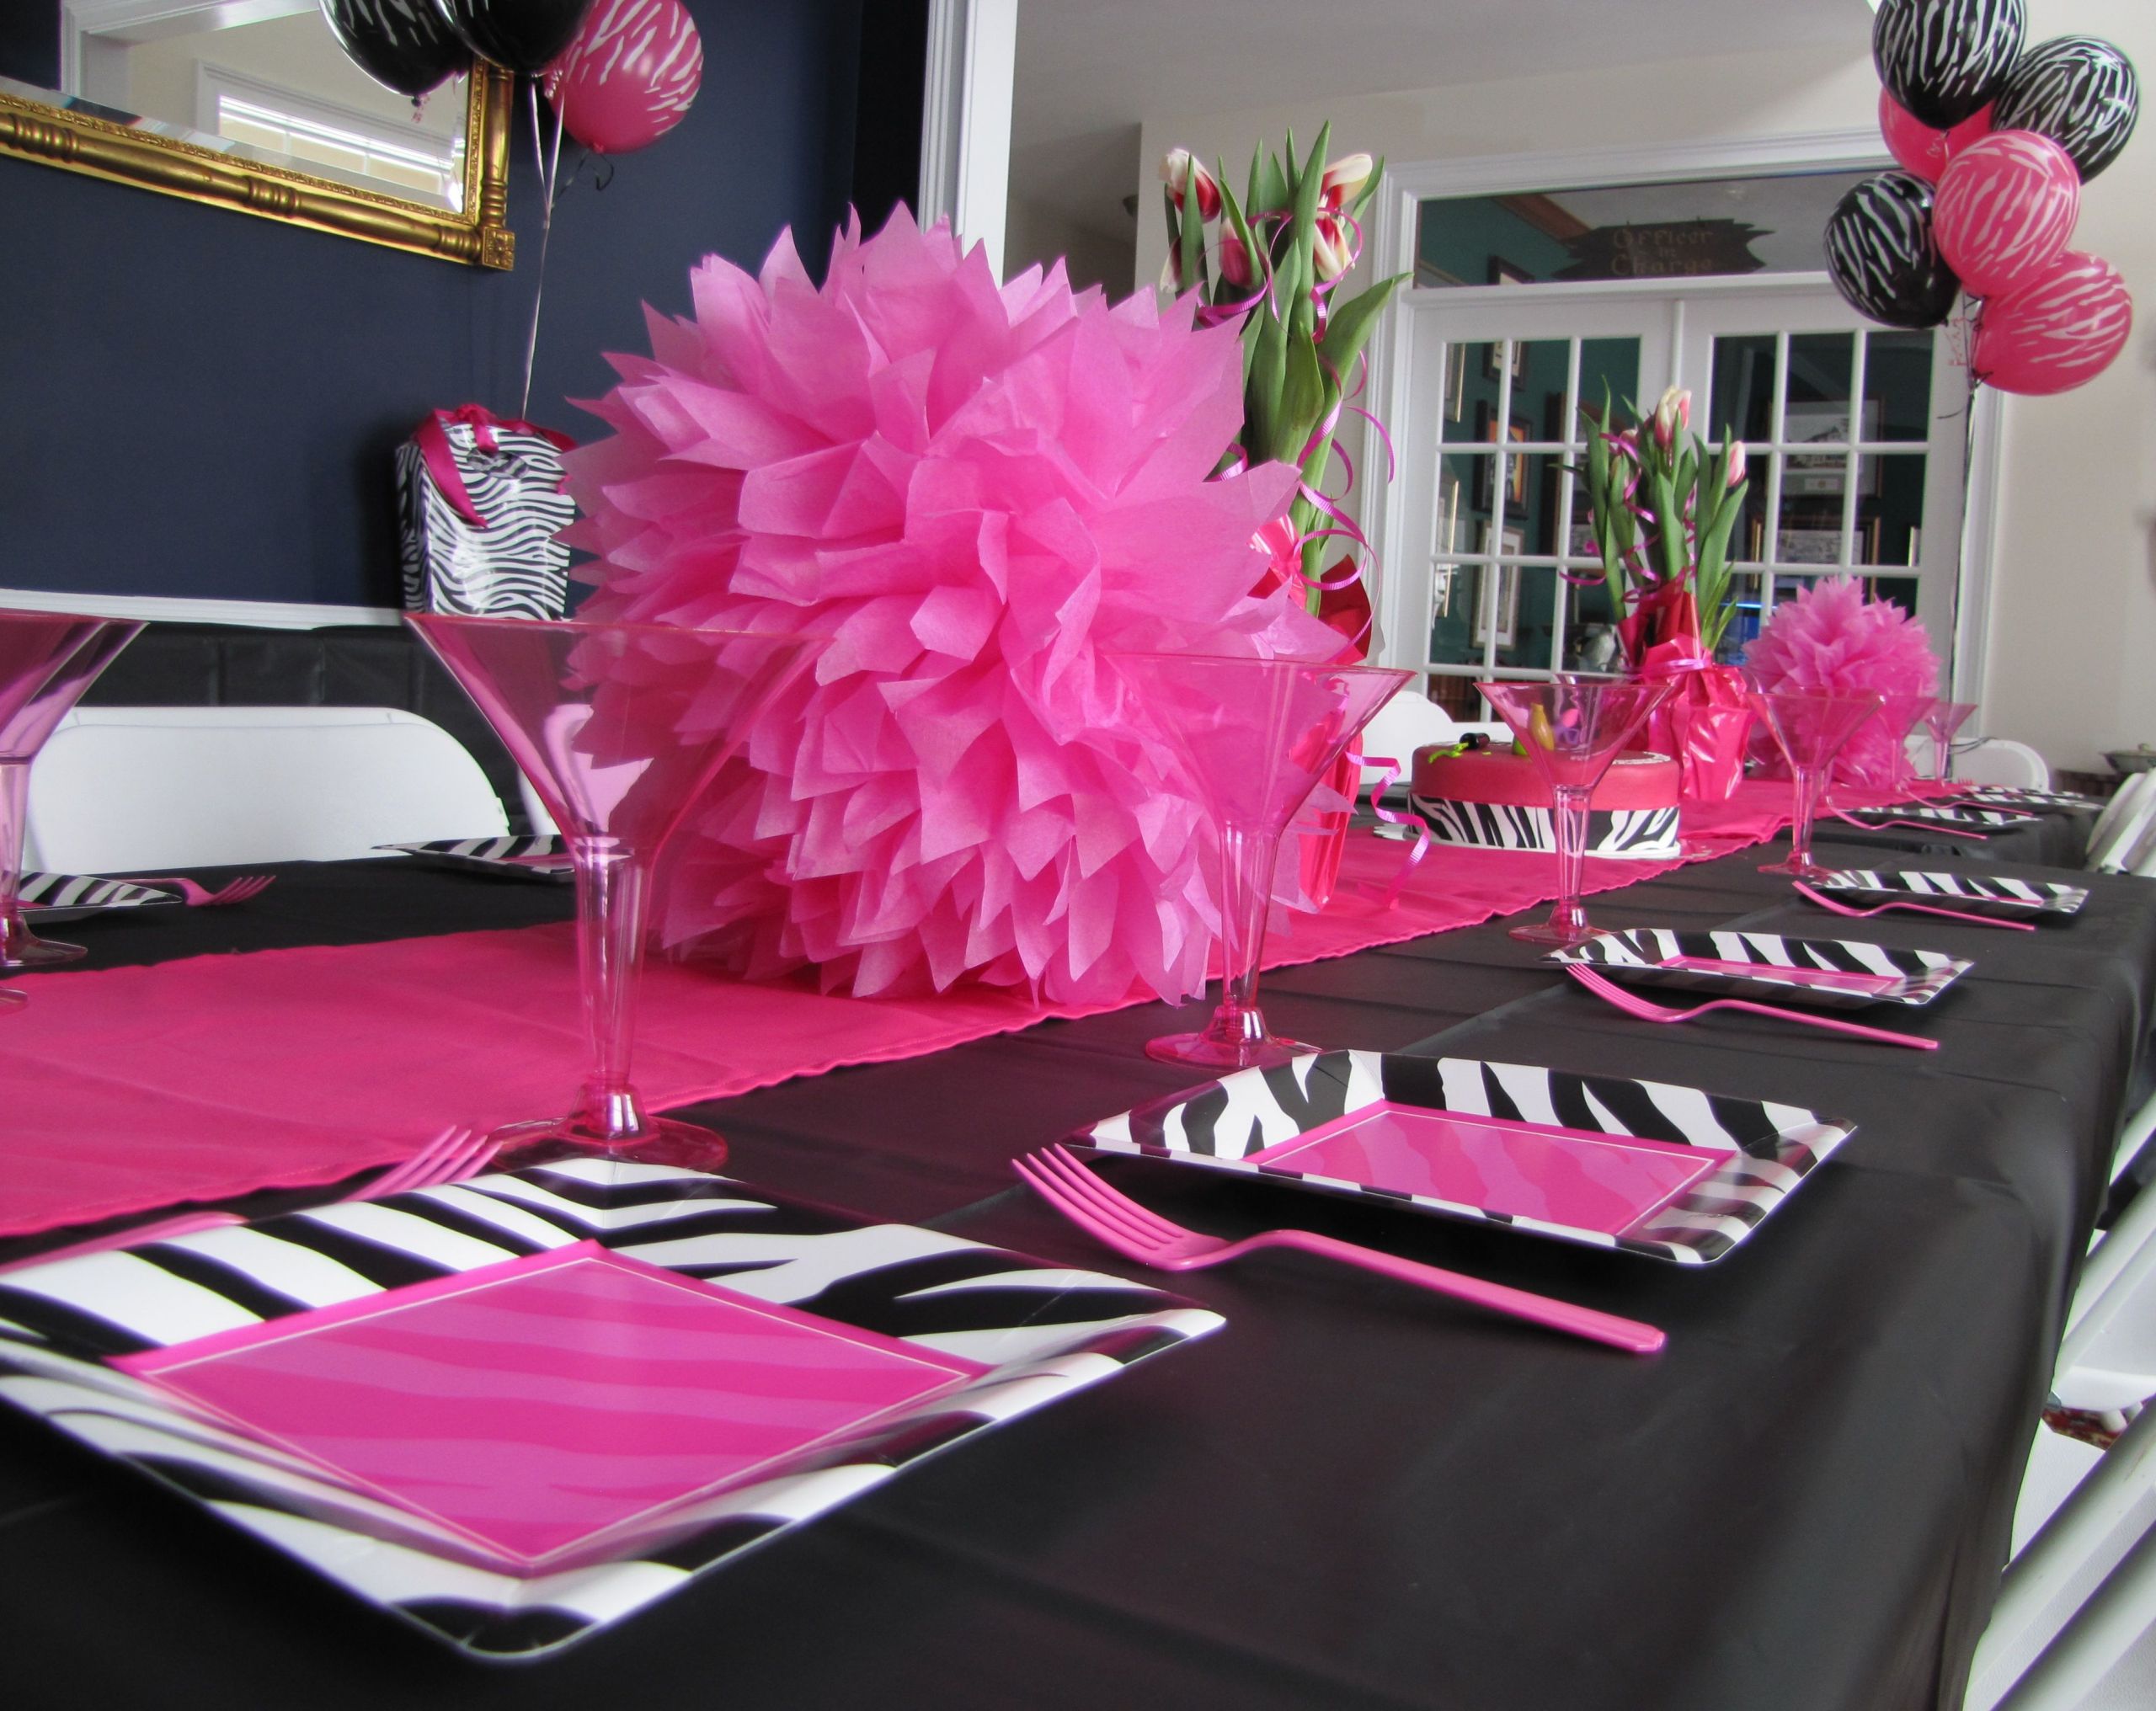 Zebra Decorations For Birthday Party
 Zebra Print Party Supplies and Decorations